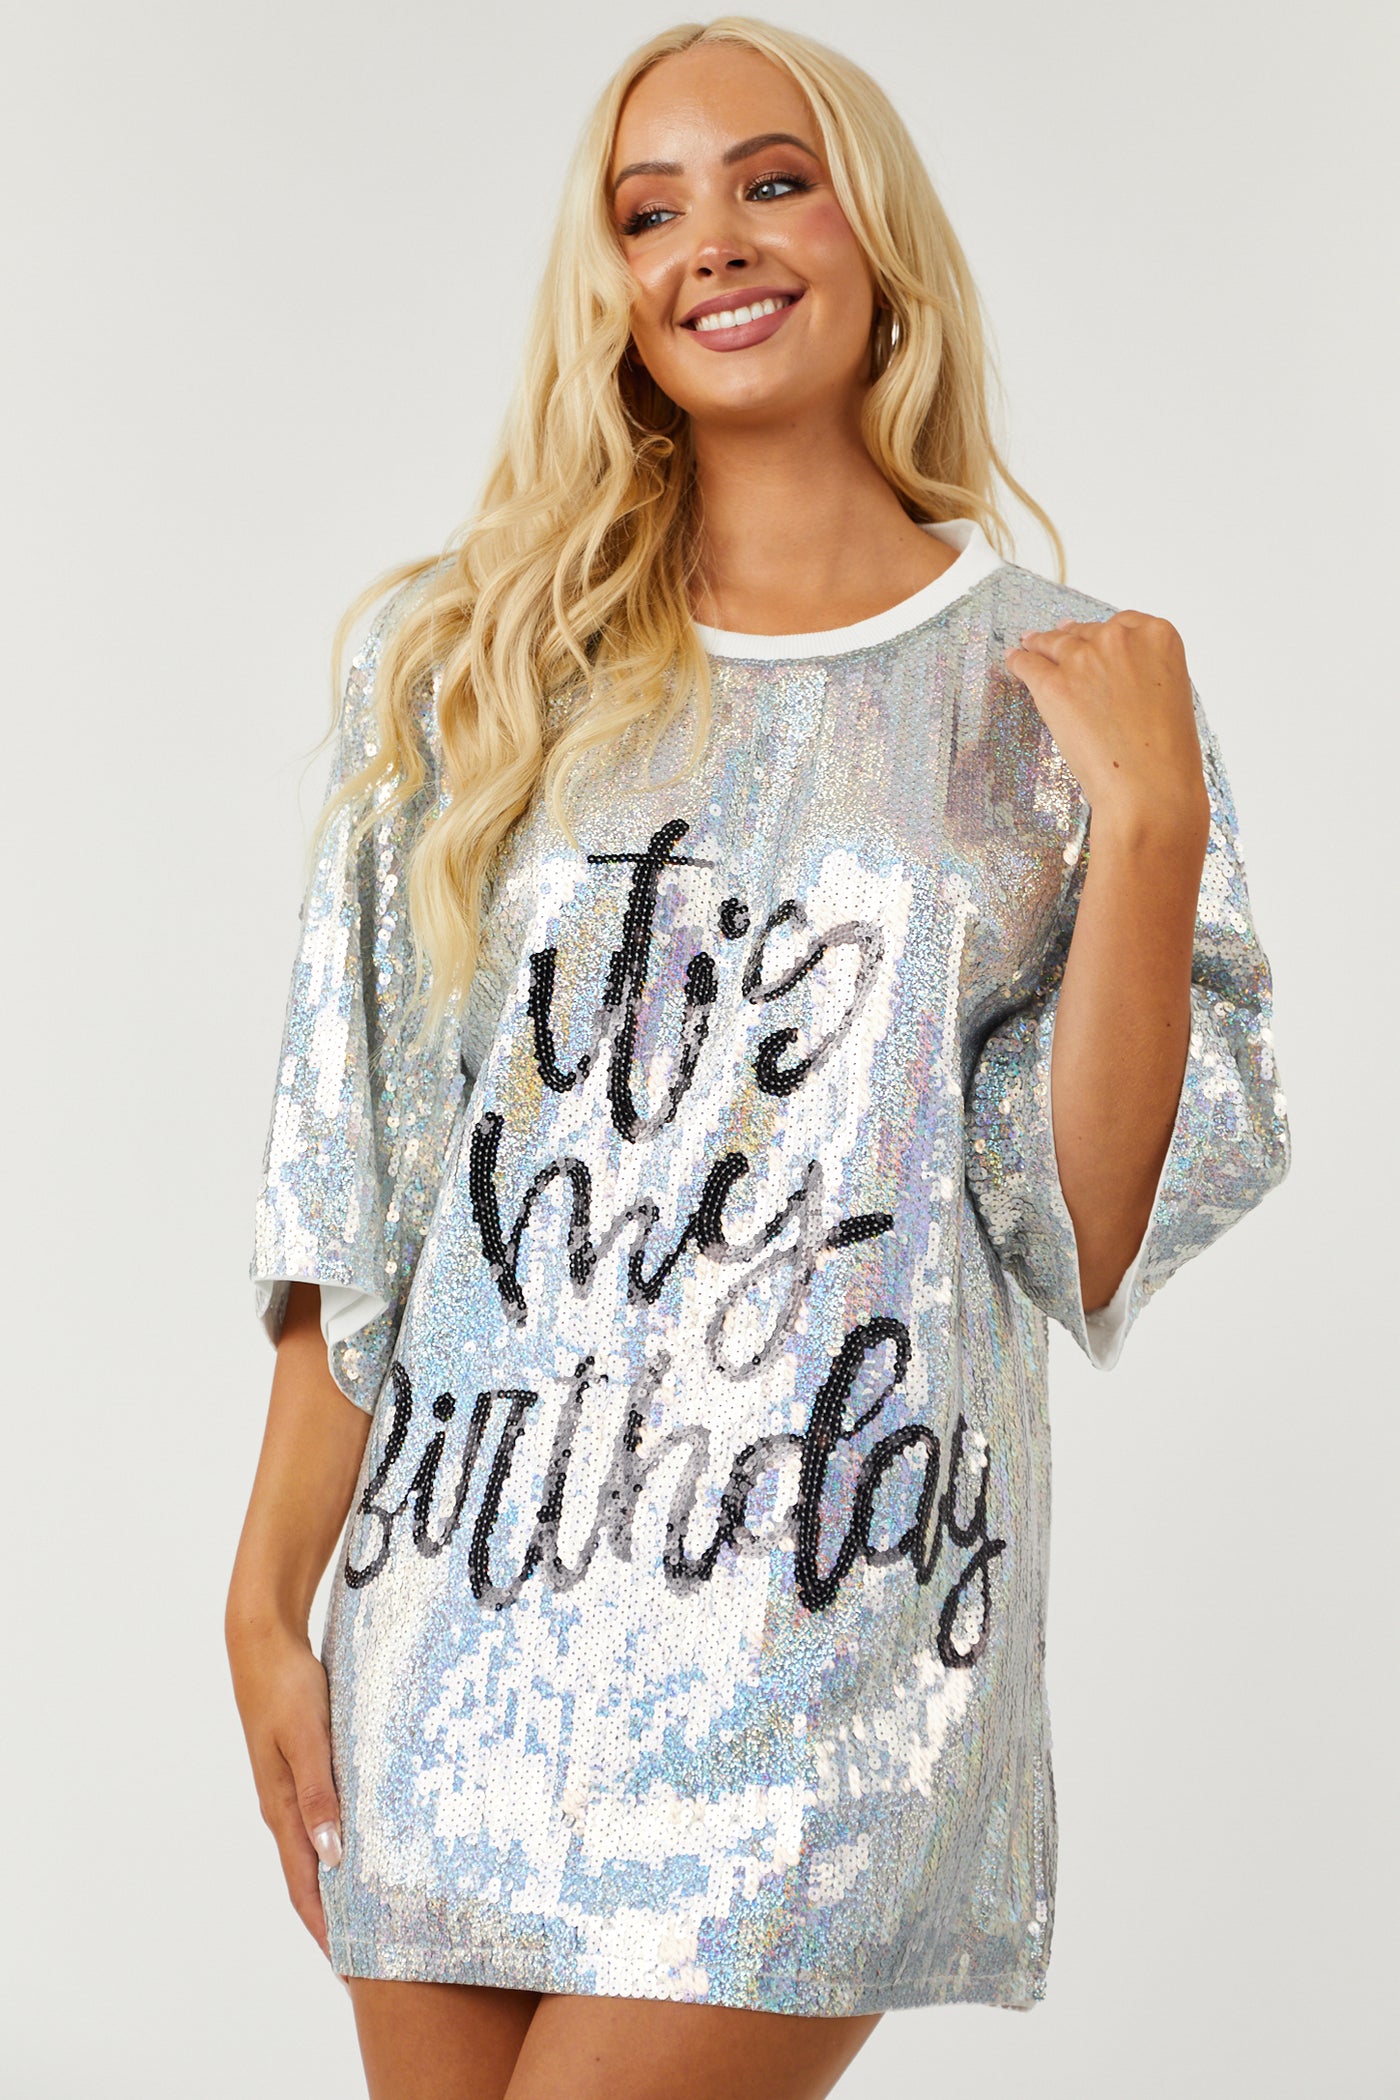 Its My birthday Sequin Shirt/Dress (ONE SIZE)